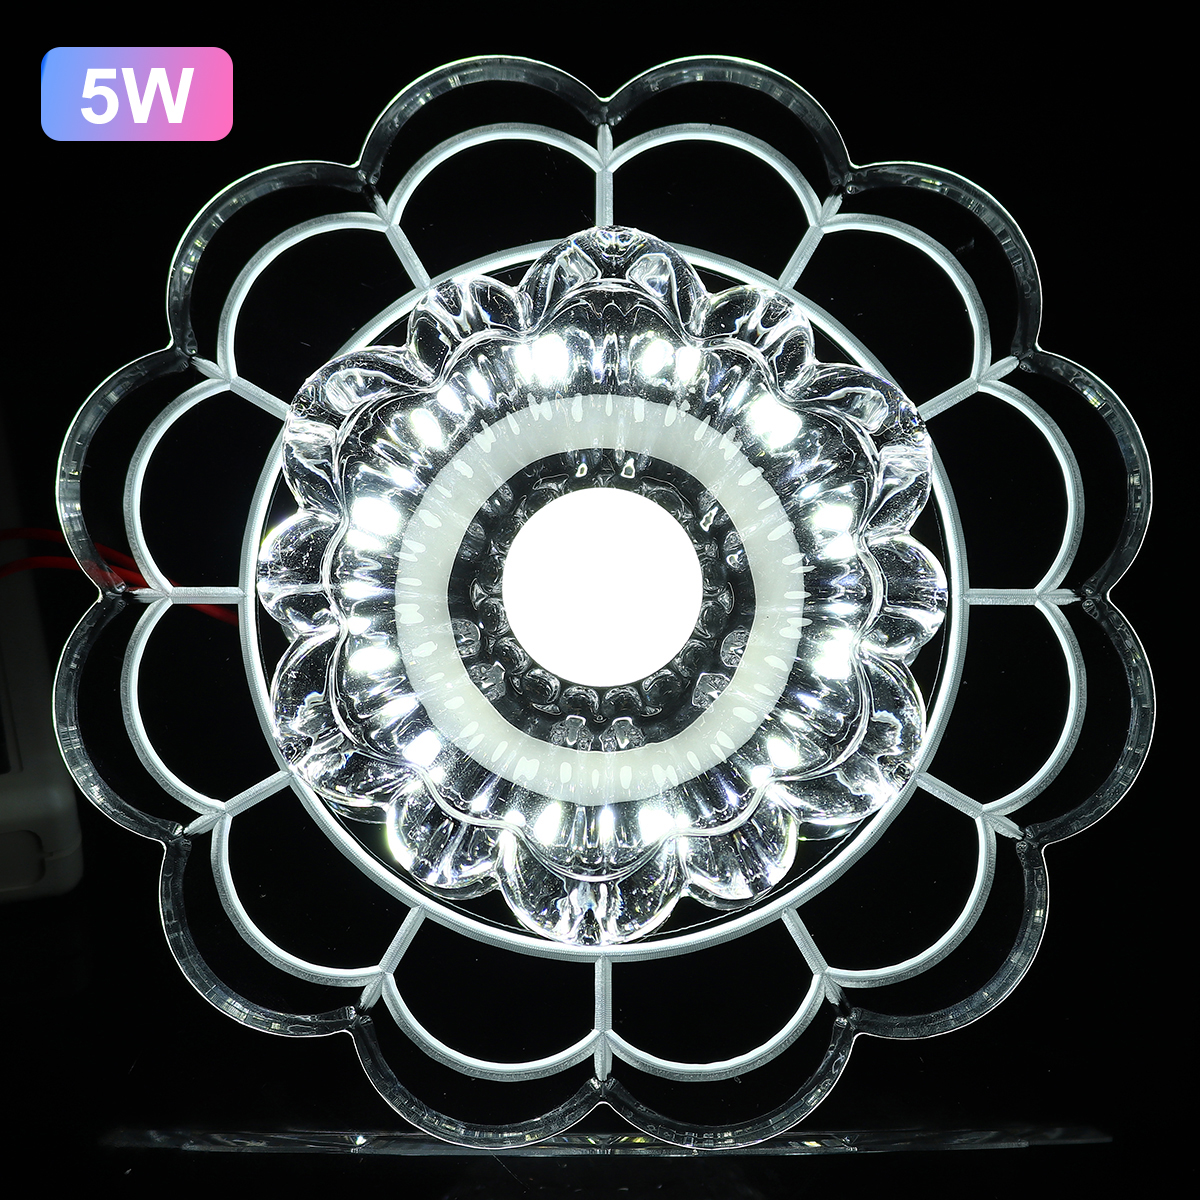 35W-79-LED-Crystal-Ceiling-Light-Ultra-Thin-Flush-Mount-Kitchen-Home-Fixture-1697198-7